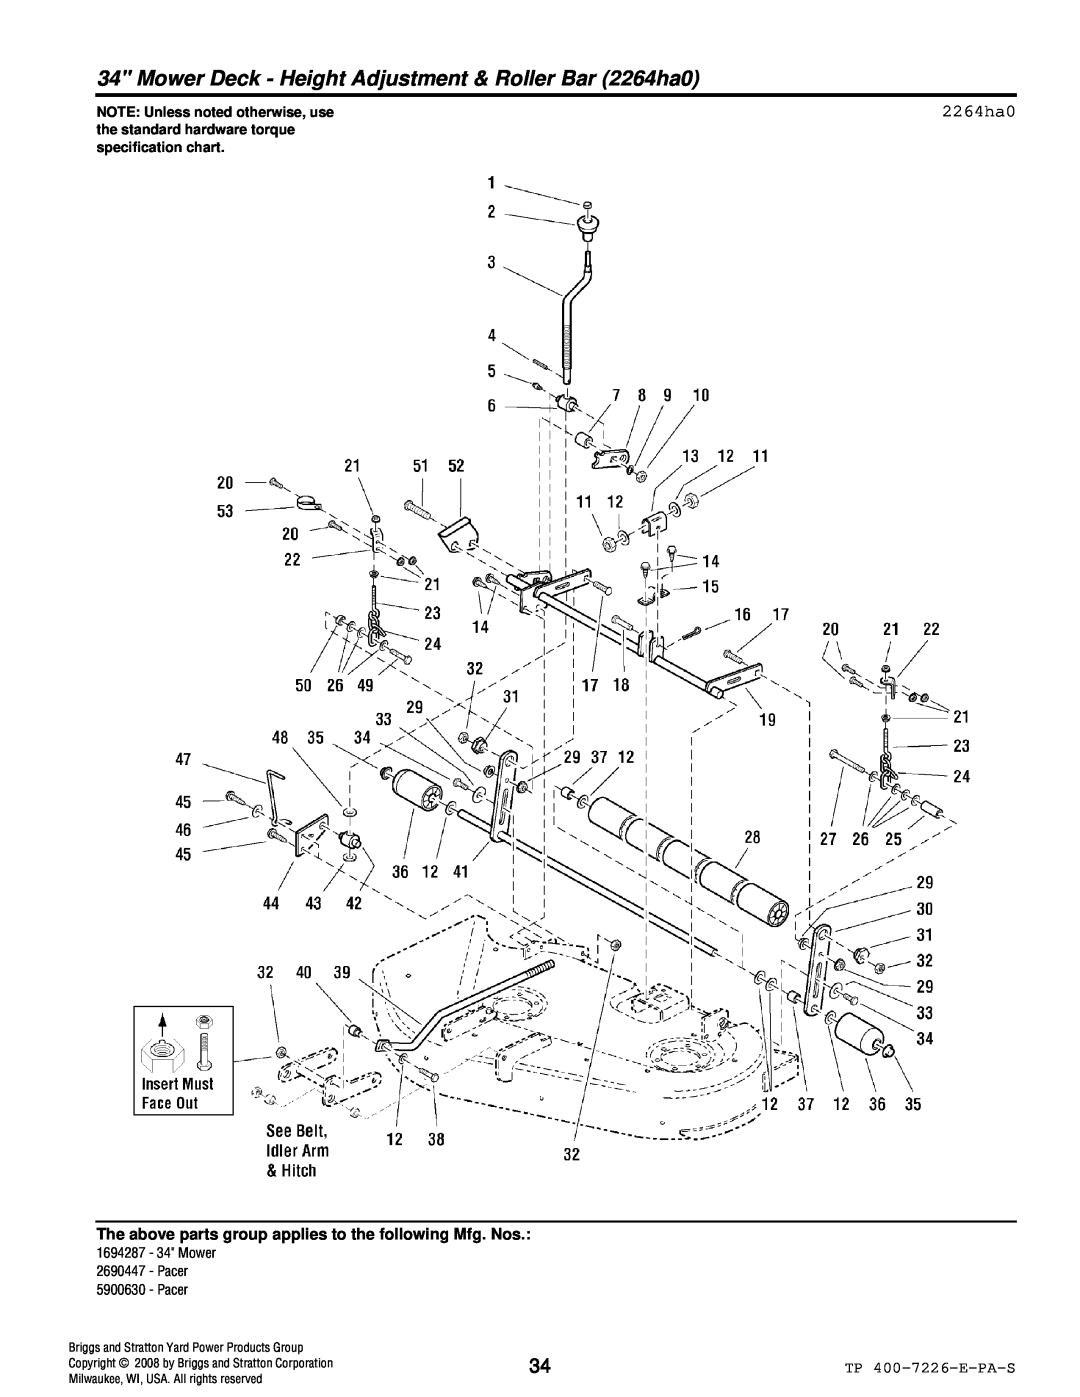 Simplicity Pacer manual 2264ha0, NOTE Unless noted otherwise, use, the standard hardware torque specification chart 